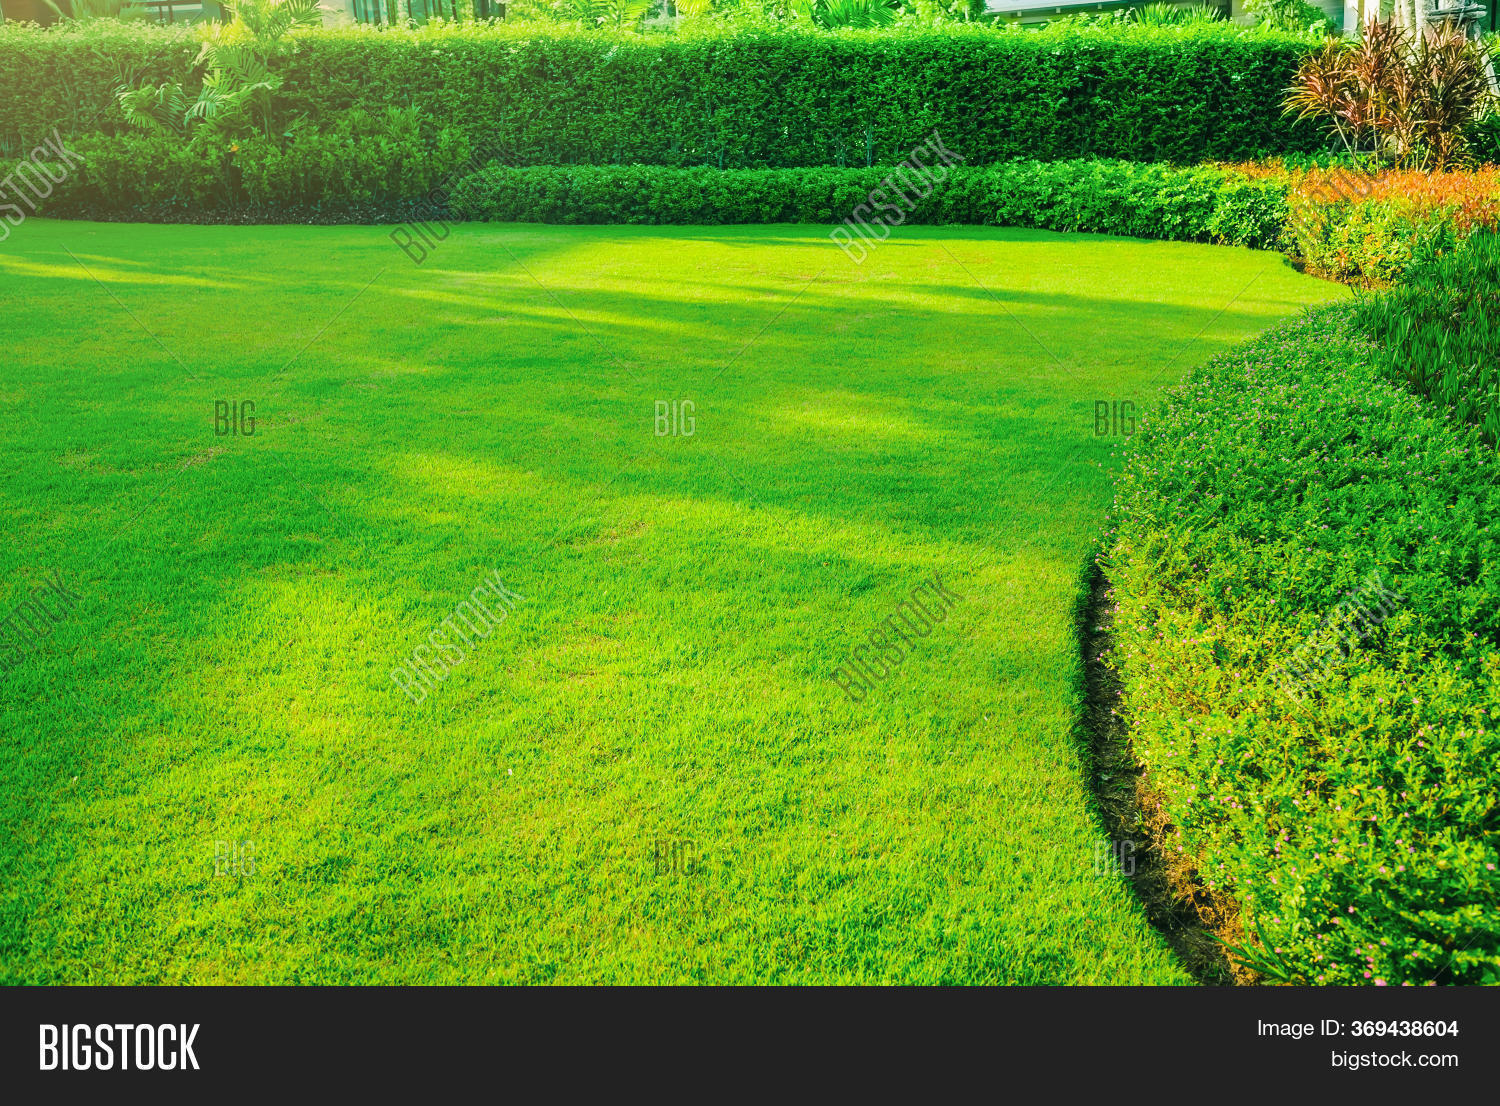 A guide to achieving a lush and vibrant garden with green grass